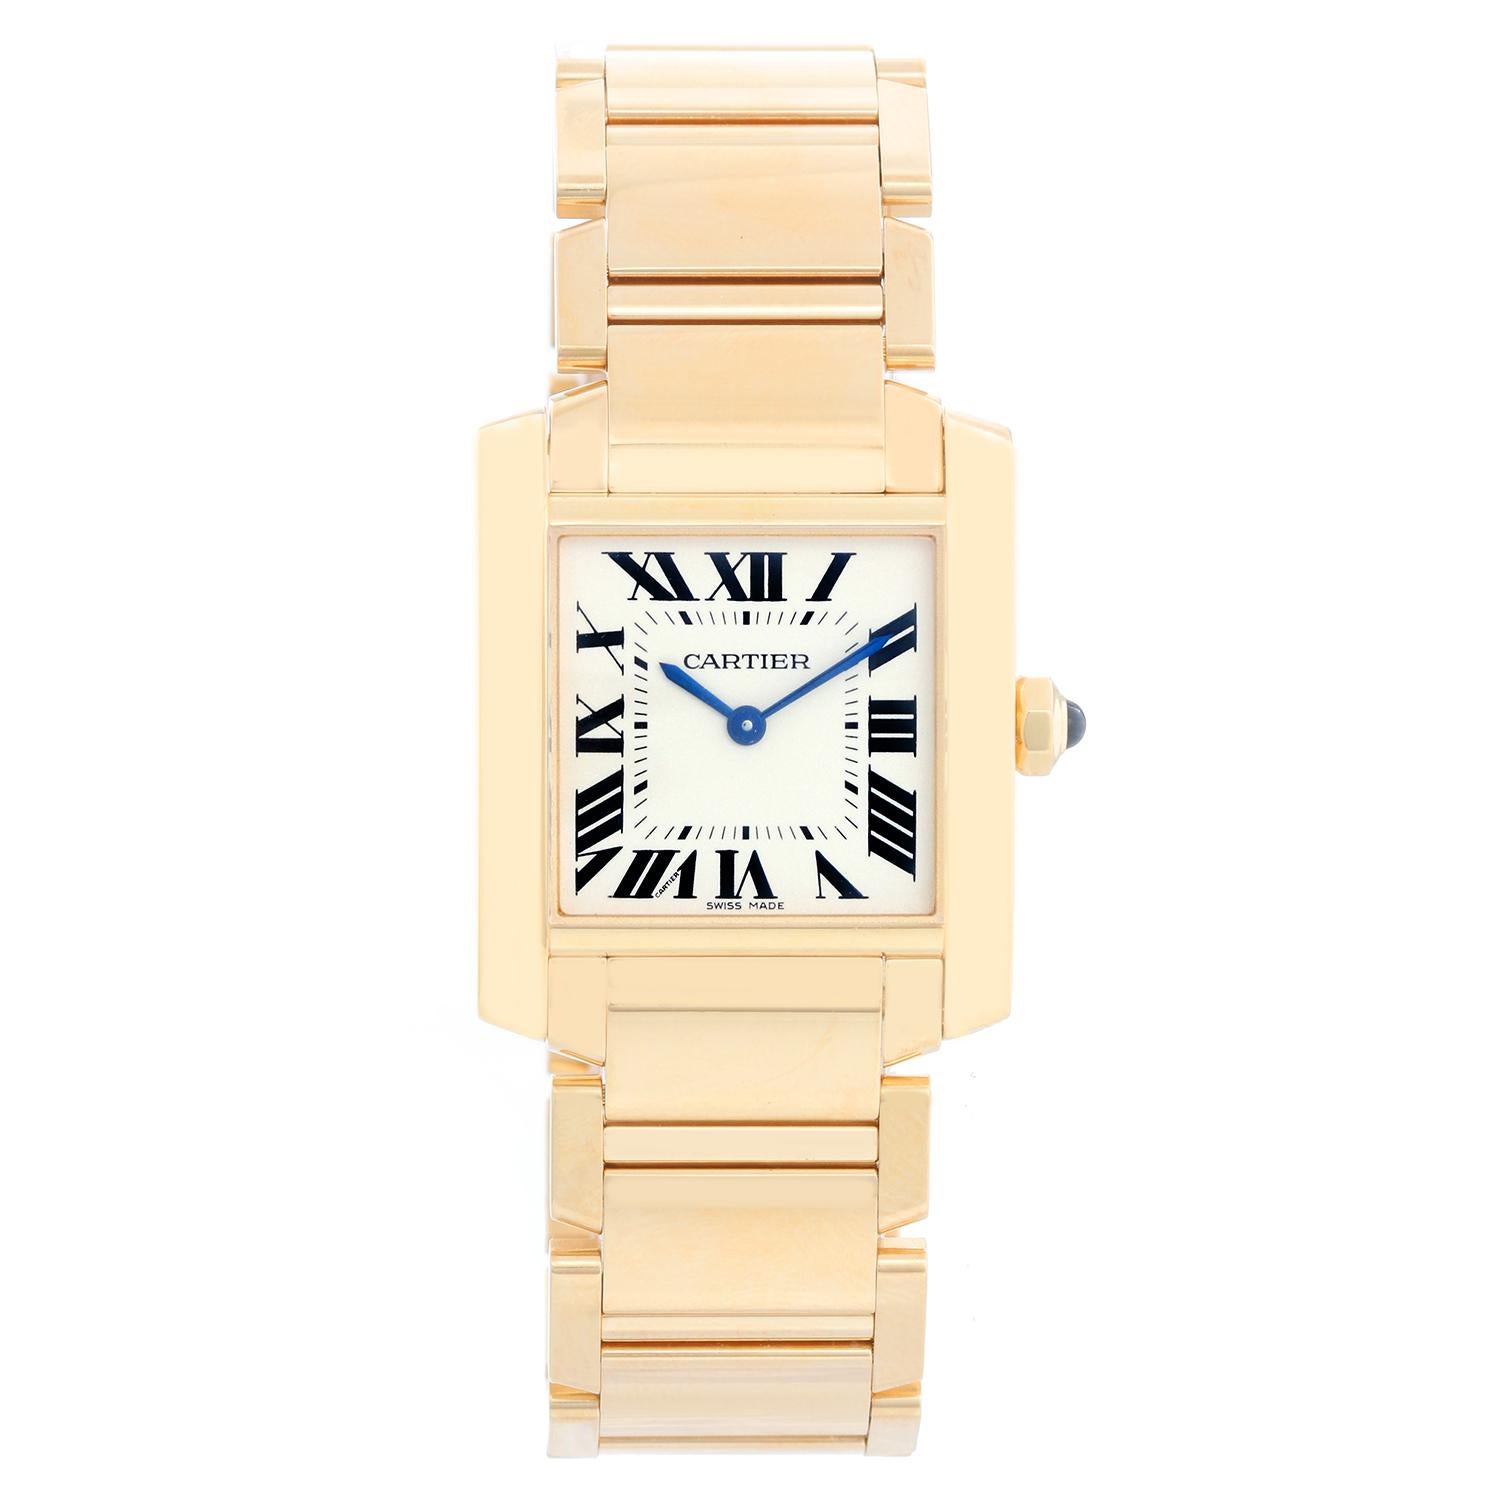 Cartier Tank Francaise Midsize 18k Yellow Gold Watch W50003N2 4211 - Quartz. 18k yellow gold  case; blue sapphire cabochon crown ( 25 x 30 mm ). Ivory colored dial with black Roman numerals. Cartier 18k yellow gold bracelet; will fit a 6 3/4 inch